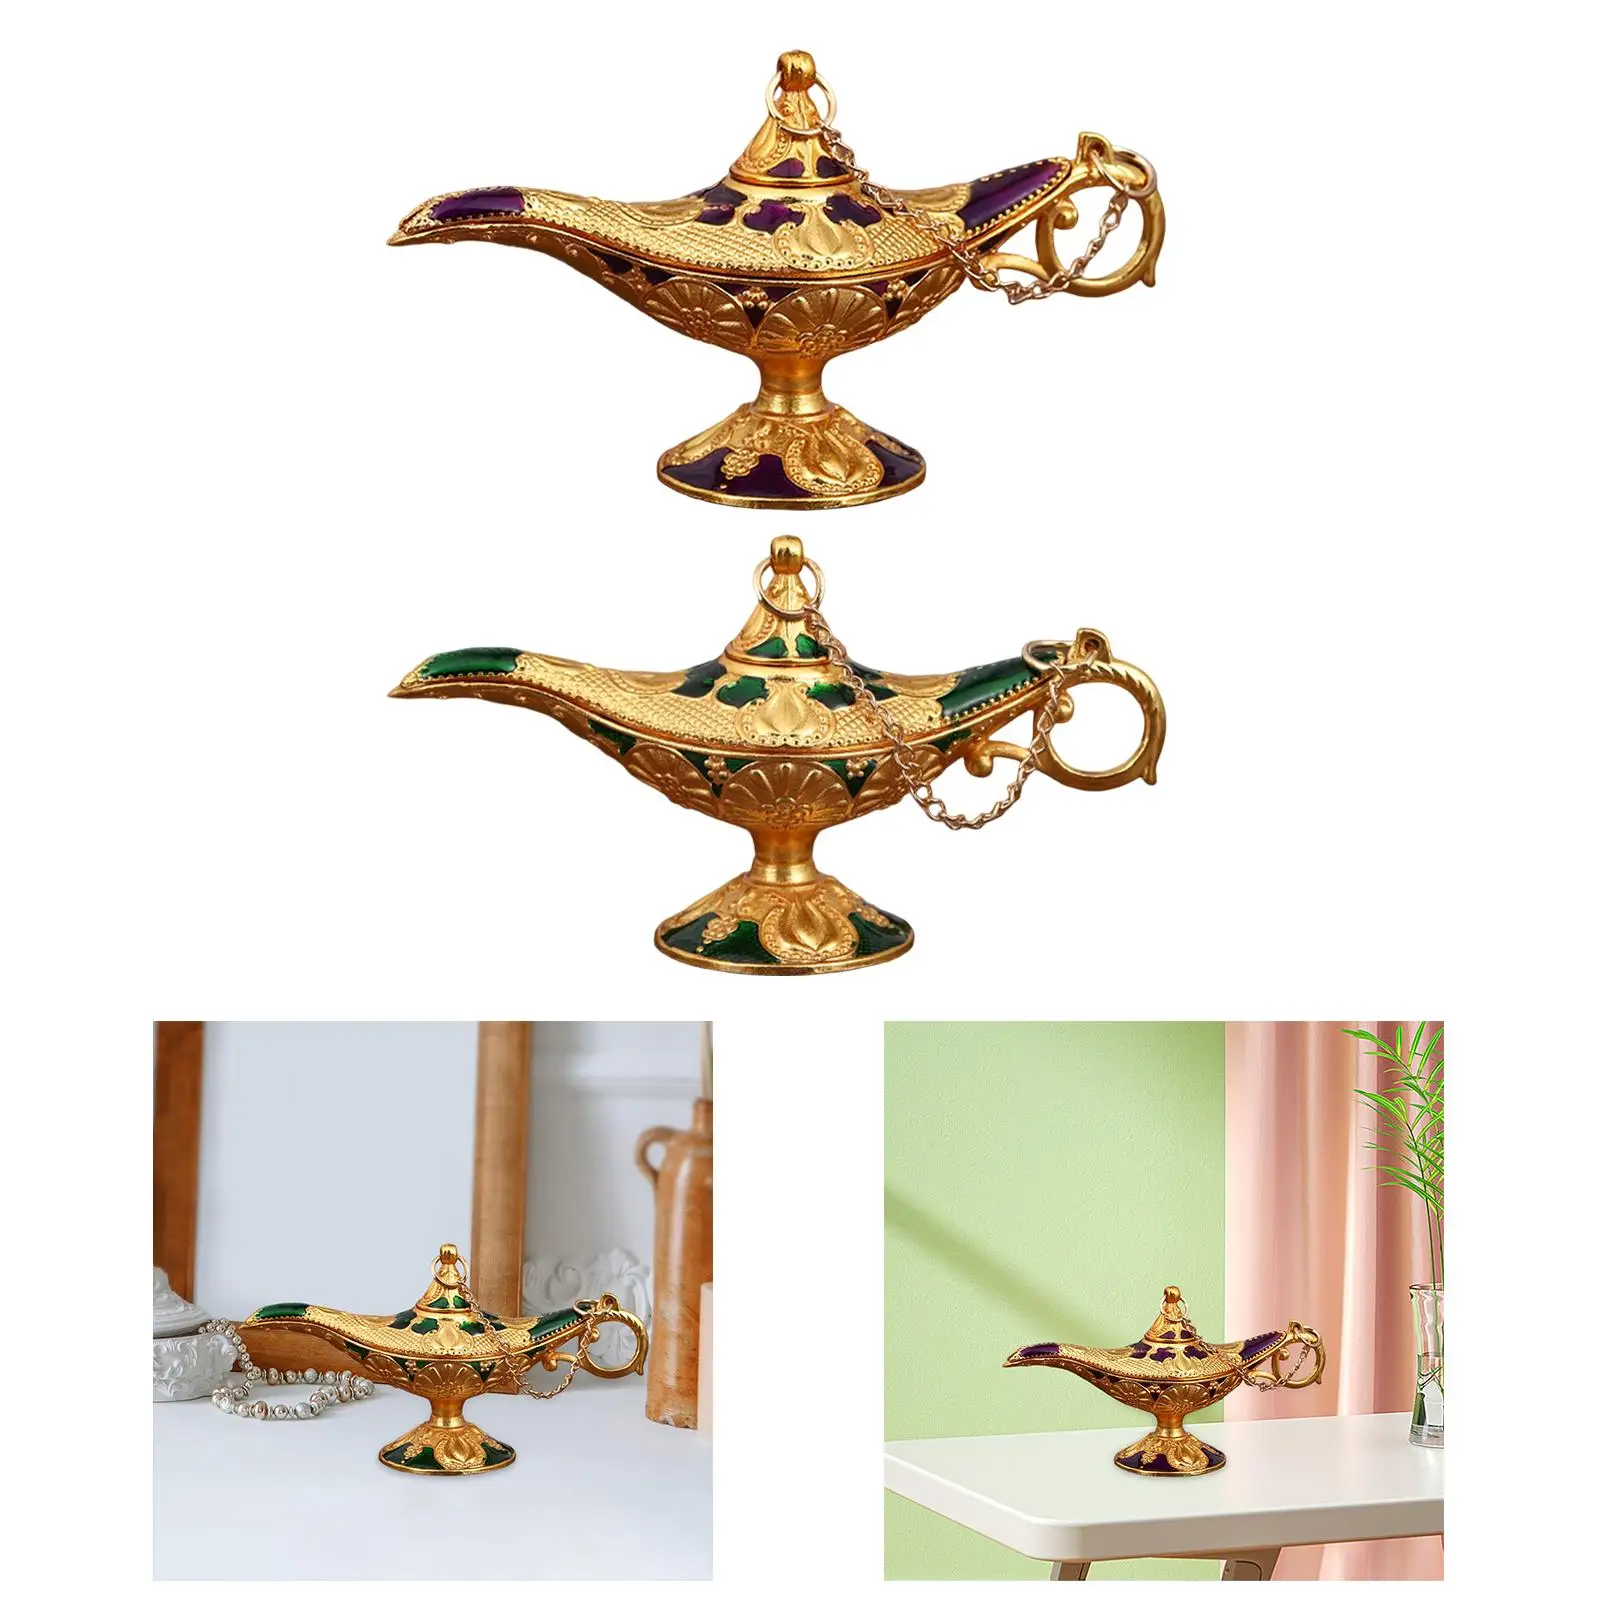 Genie Lamp Desktop Ornament Classic Arabian Stage Show Props Wishing Light for Birthday Gift Wedding Party Living Room Table